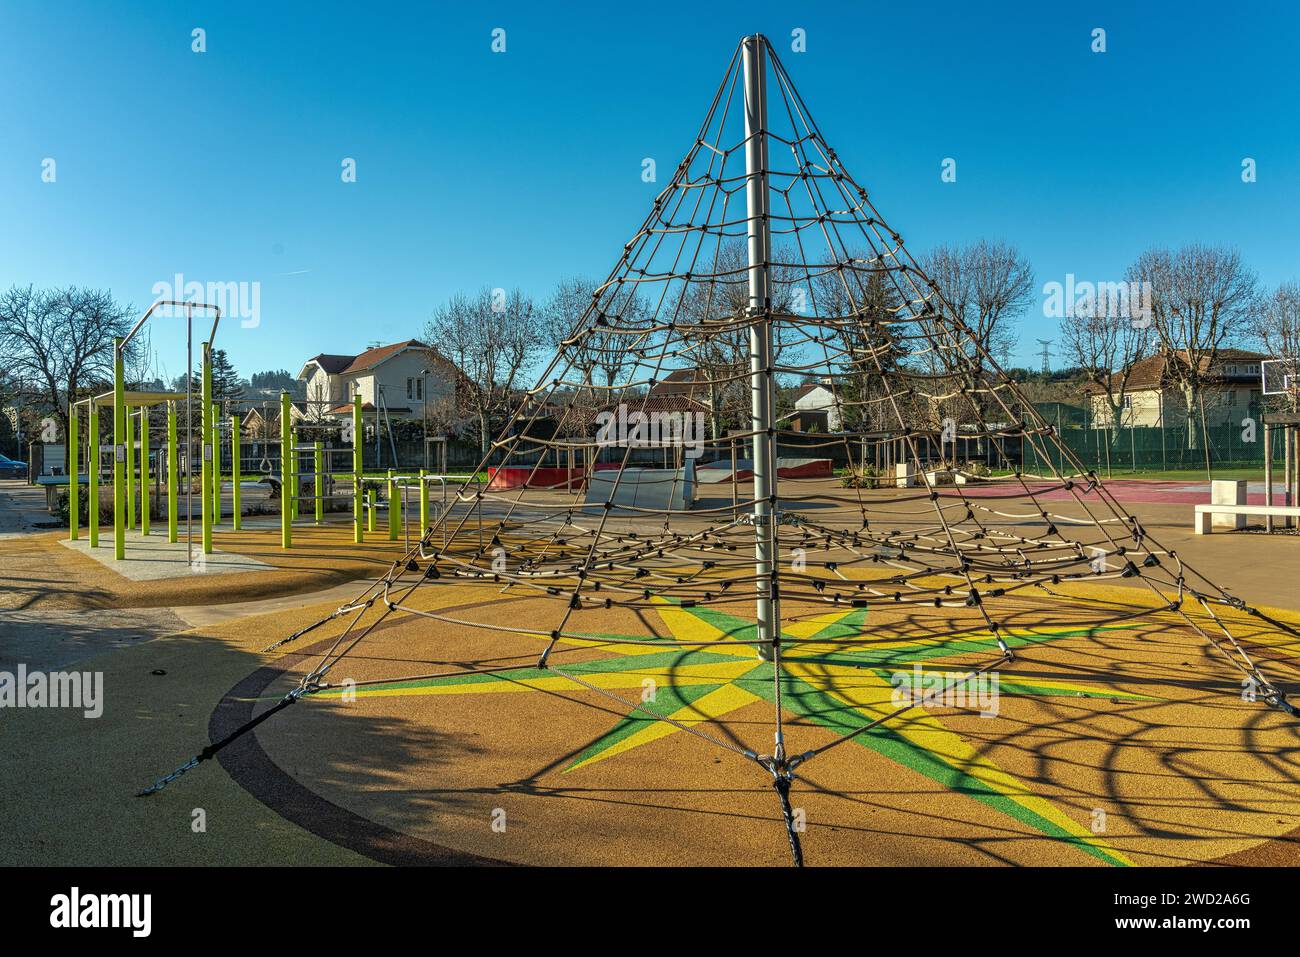 Games and fitness area dedicated to the inhabitants of the French town of Saint-Quentin-Fallavier. Saint-Quentin-Fallavier, Isère department, France Stock Photo